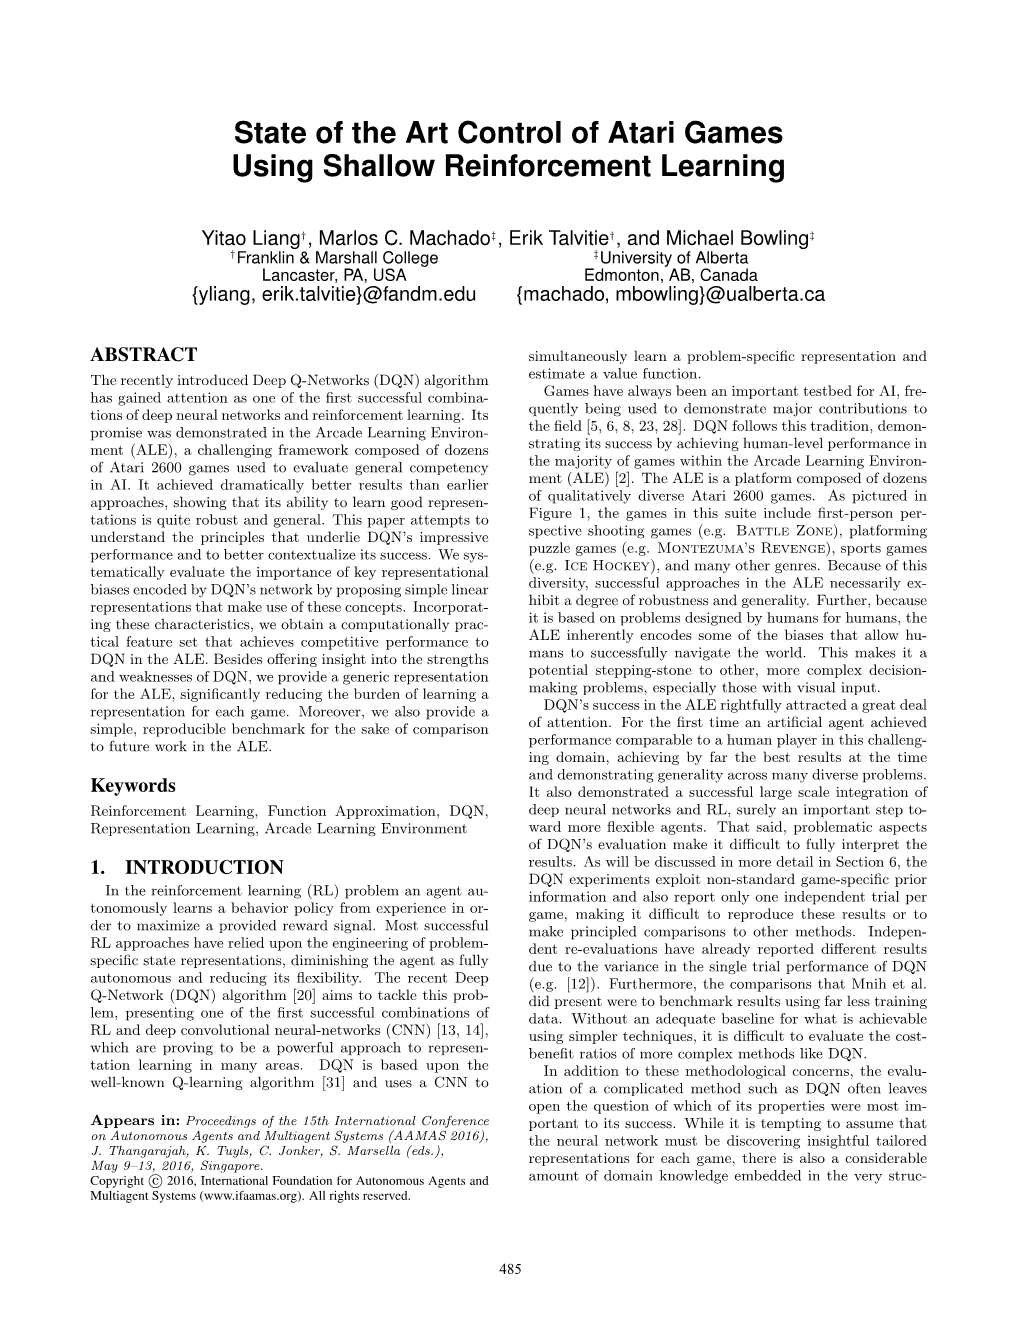 State of the Art Control of Atari Games Using Shallow Reinforcement Learning